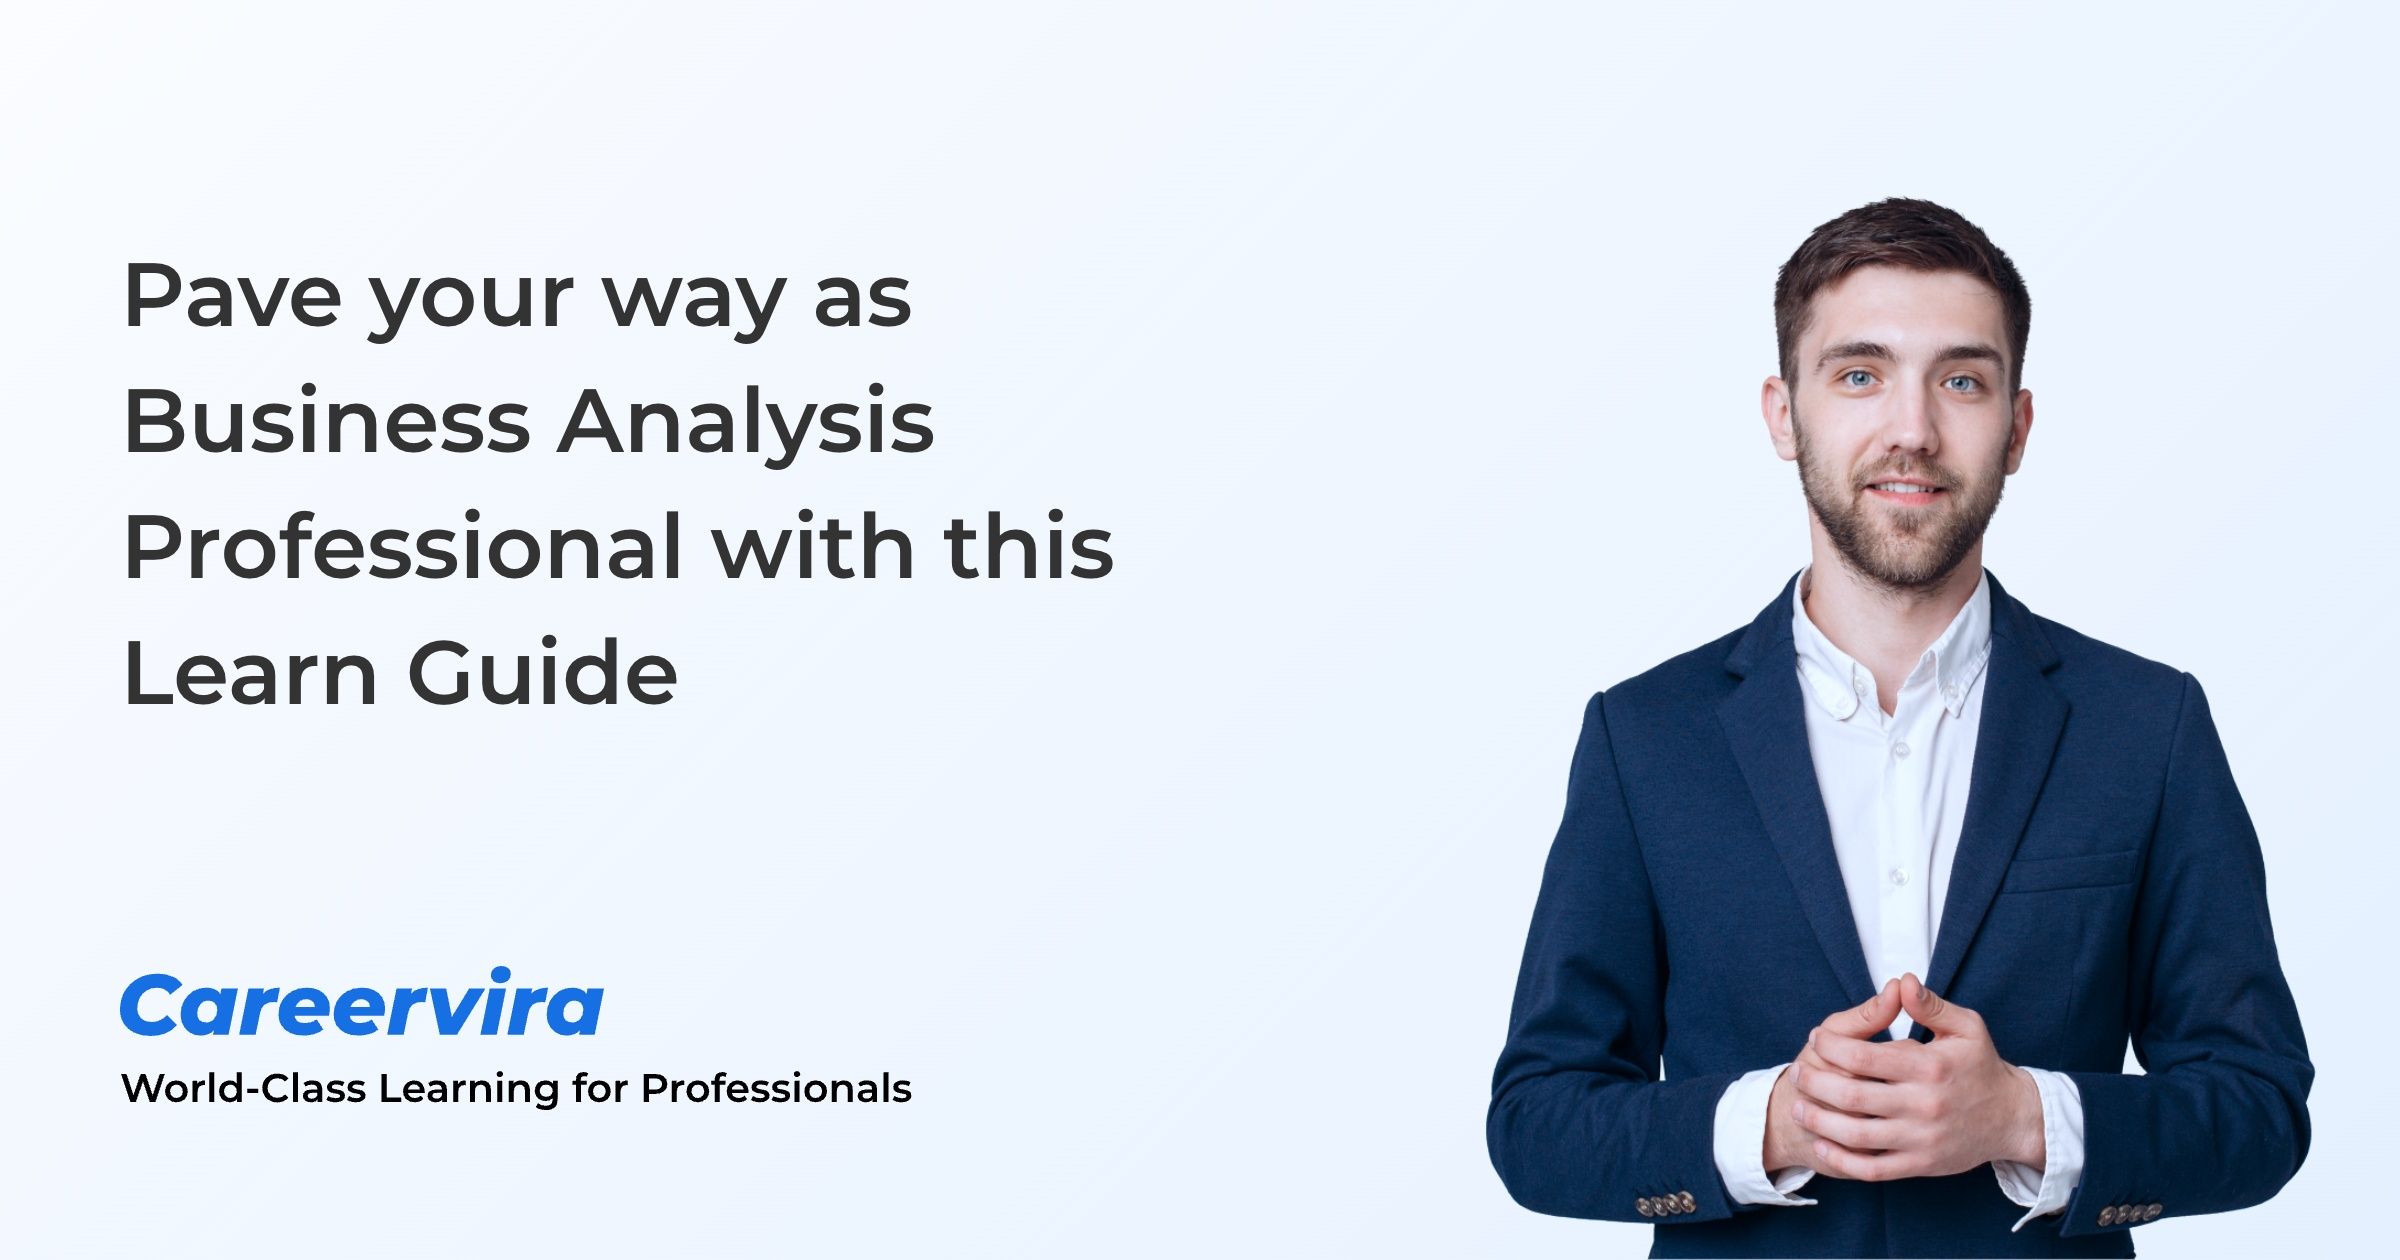 Figure: Pave your way as Business Analysis Professional with this Learn Guide